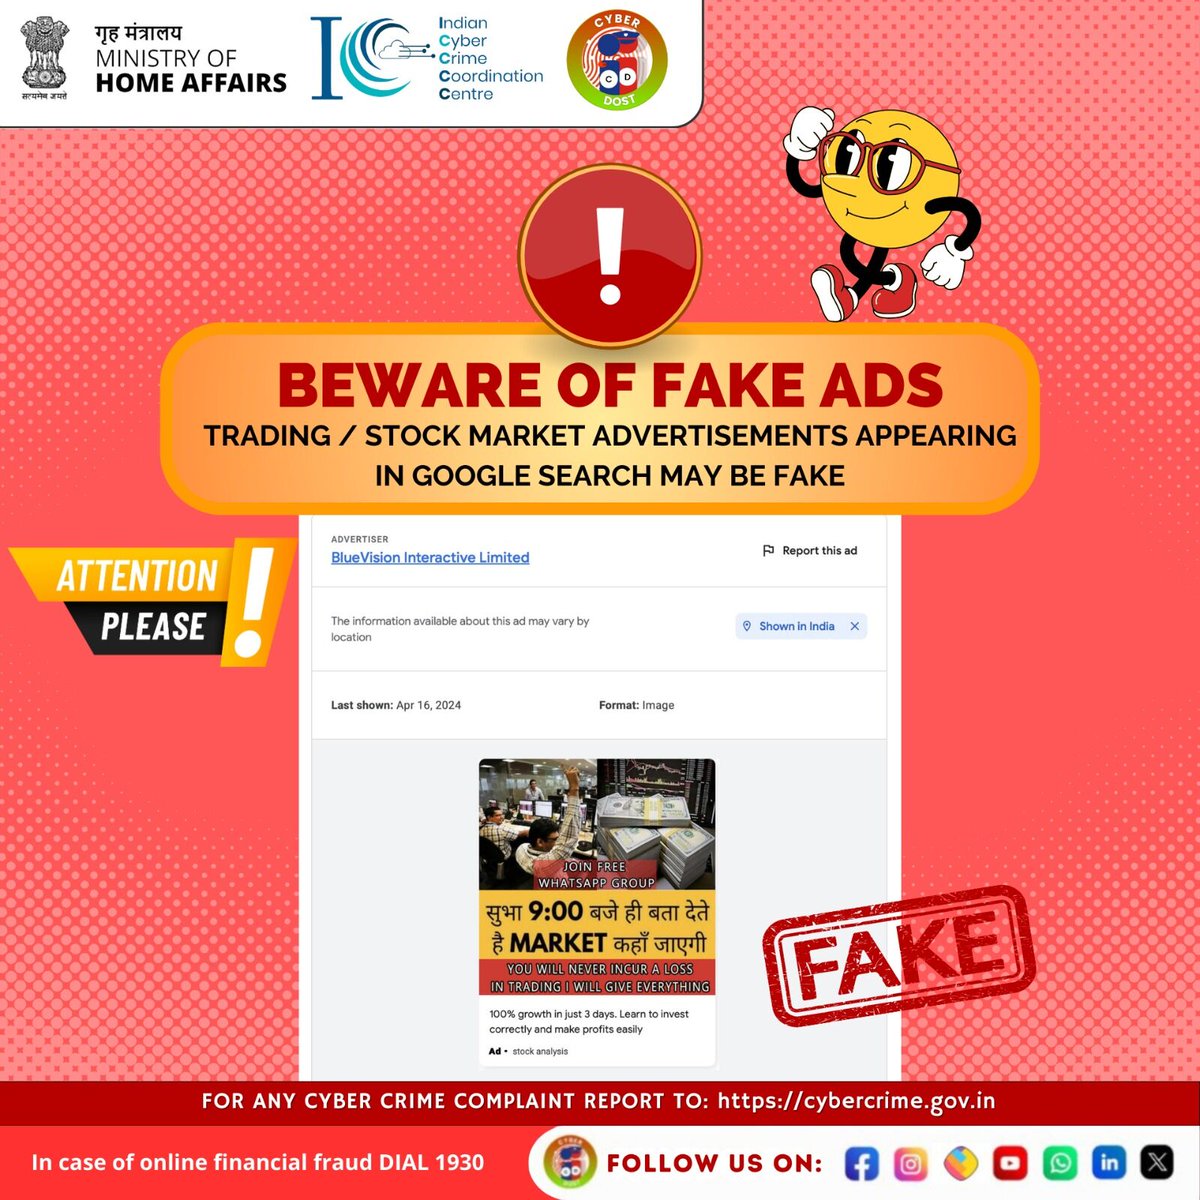 Stay Alert: Beware of Fake Trading and Stock Market Ads – Protect Yourself from Scams! #CyberSafeIndia #CyberAware #StayCyberWise #I4C #MHA #fraud #newsfeed